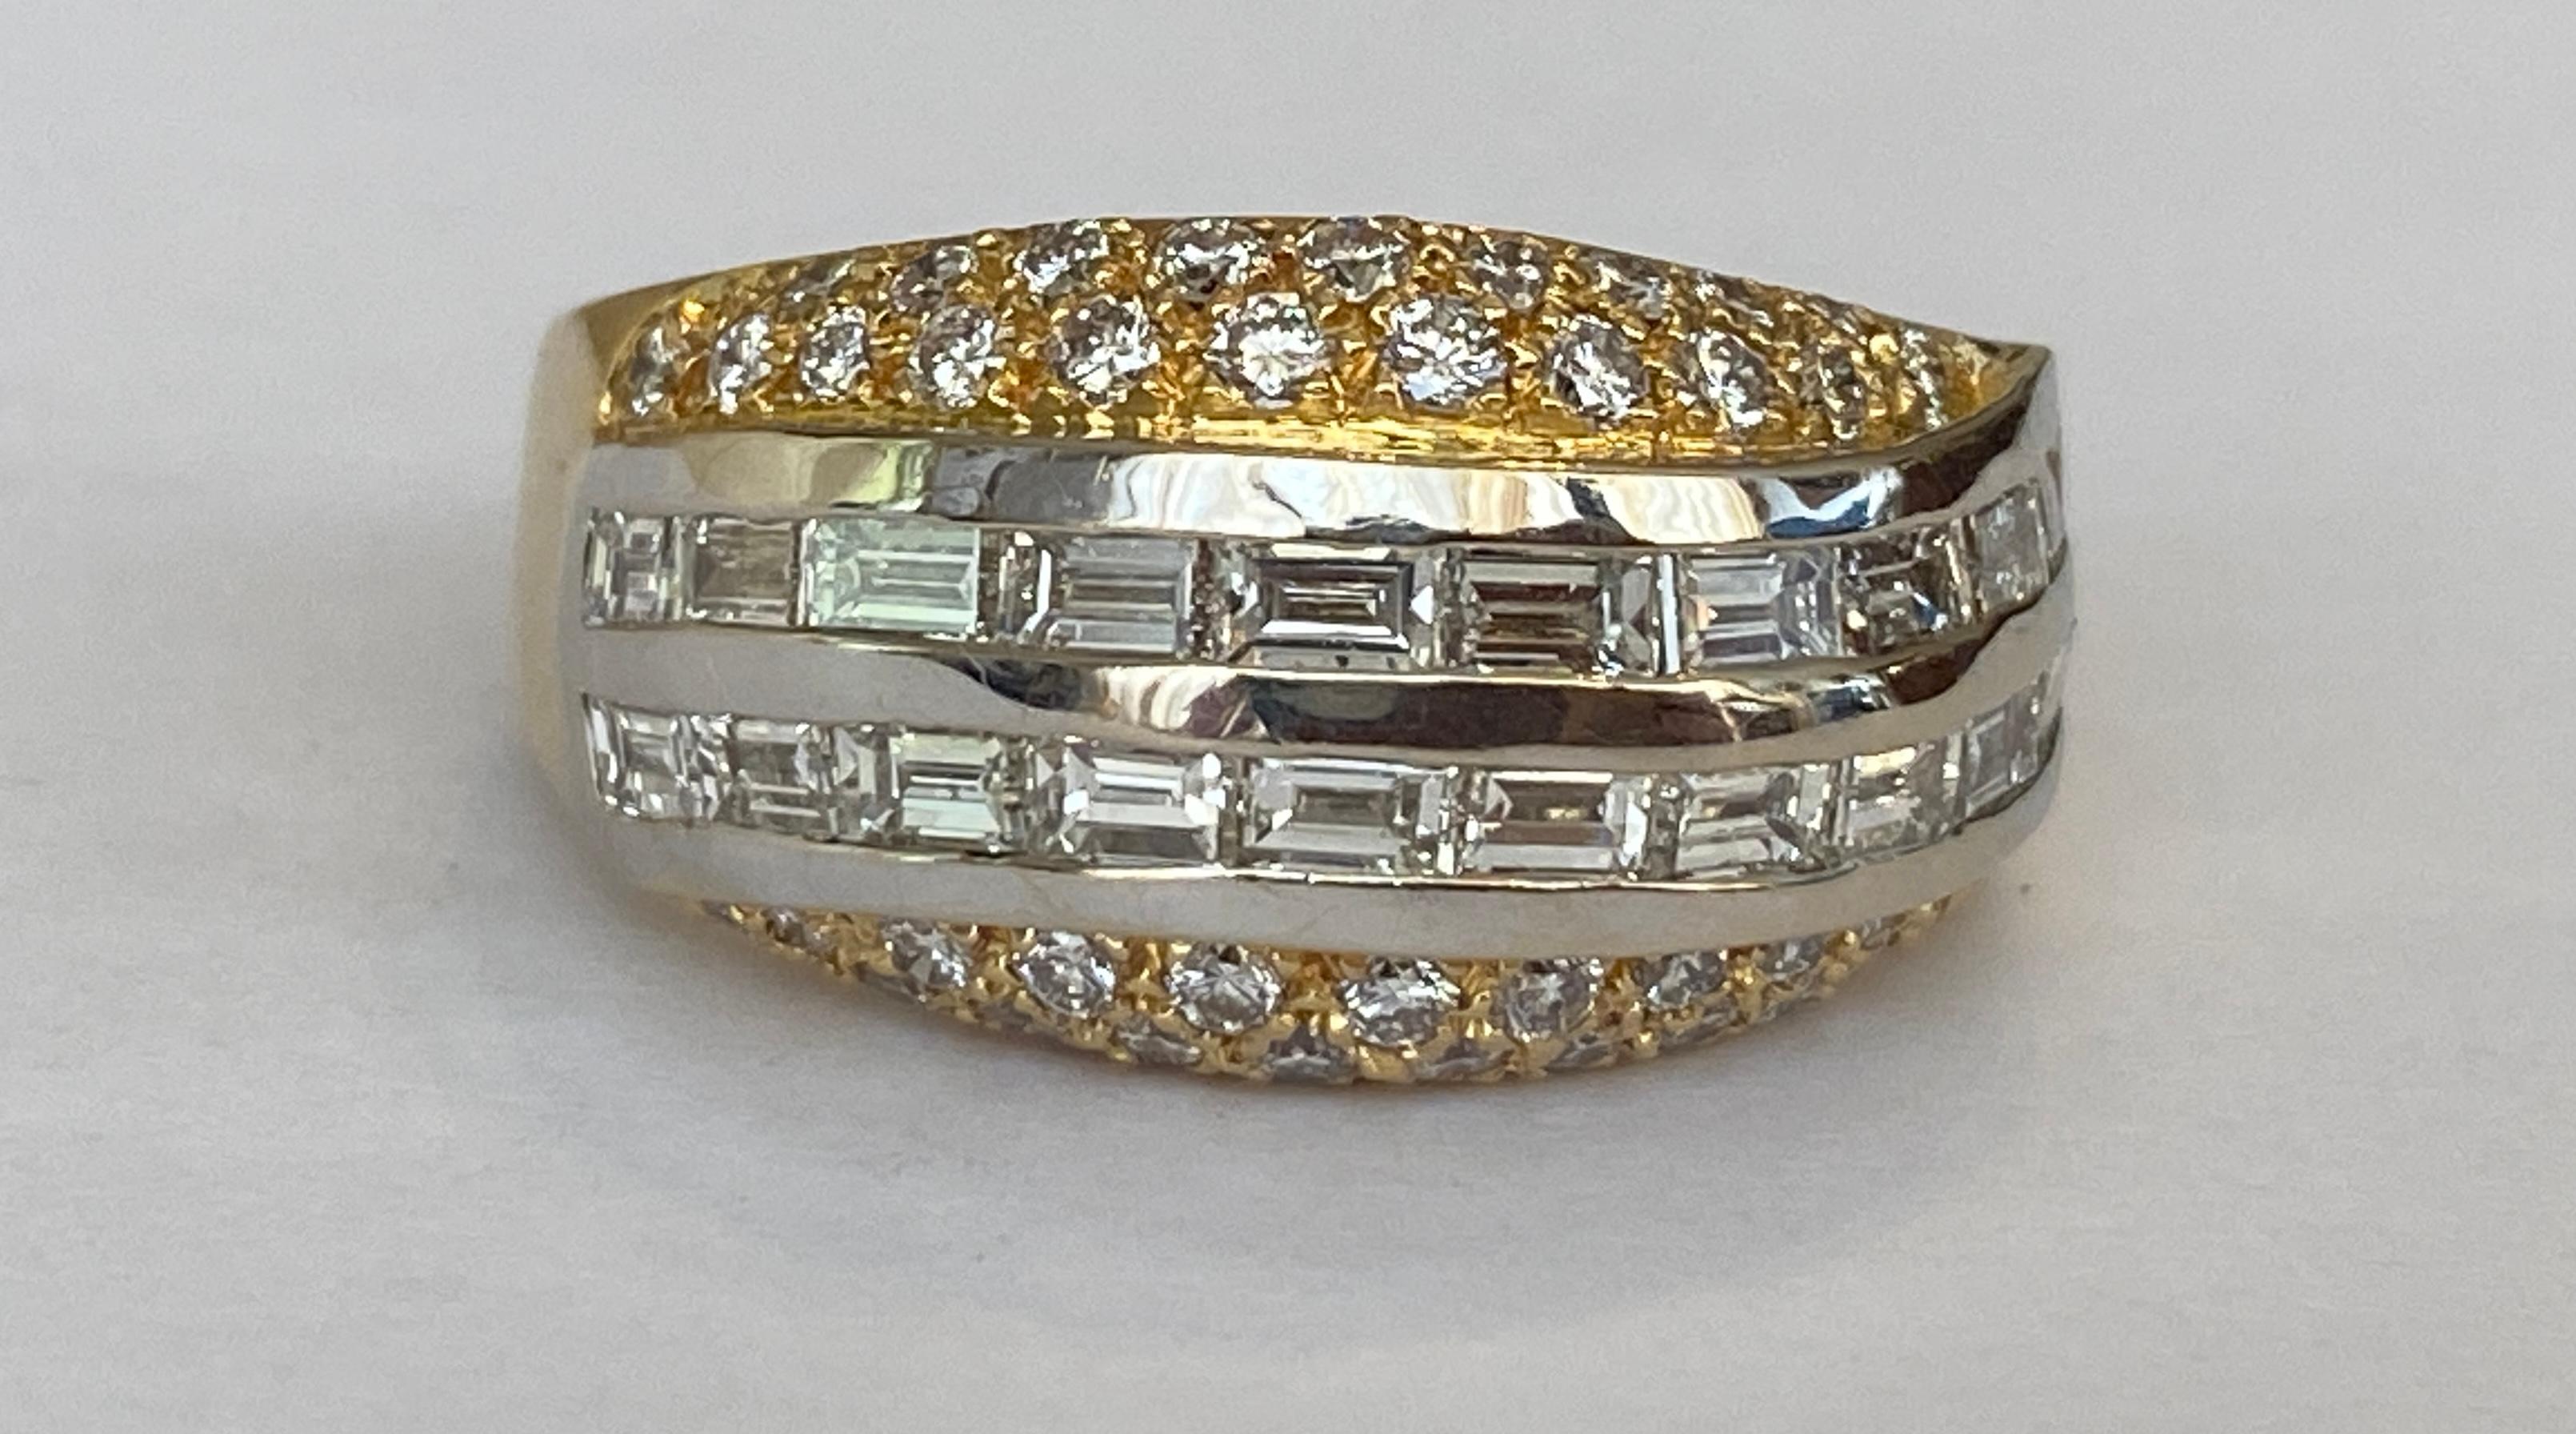 Offered in excellent condition is an 18 carat white and yellow gold band ring. The ring consists of three bands. The middle band is decorated with 20 pieces of baguette cut diamonds, approx. 1.58 ct G/VS and the other bands are set with 44 pieces of